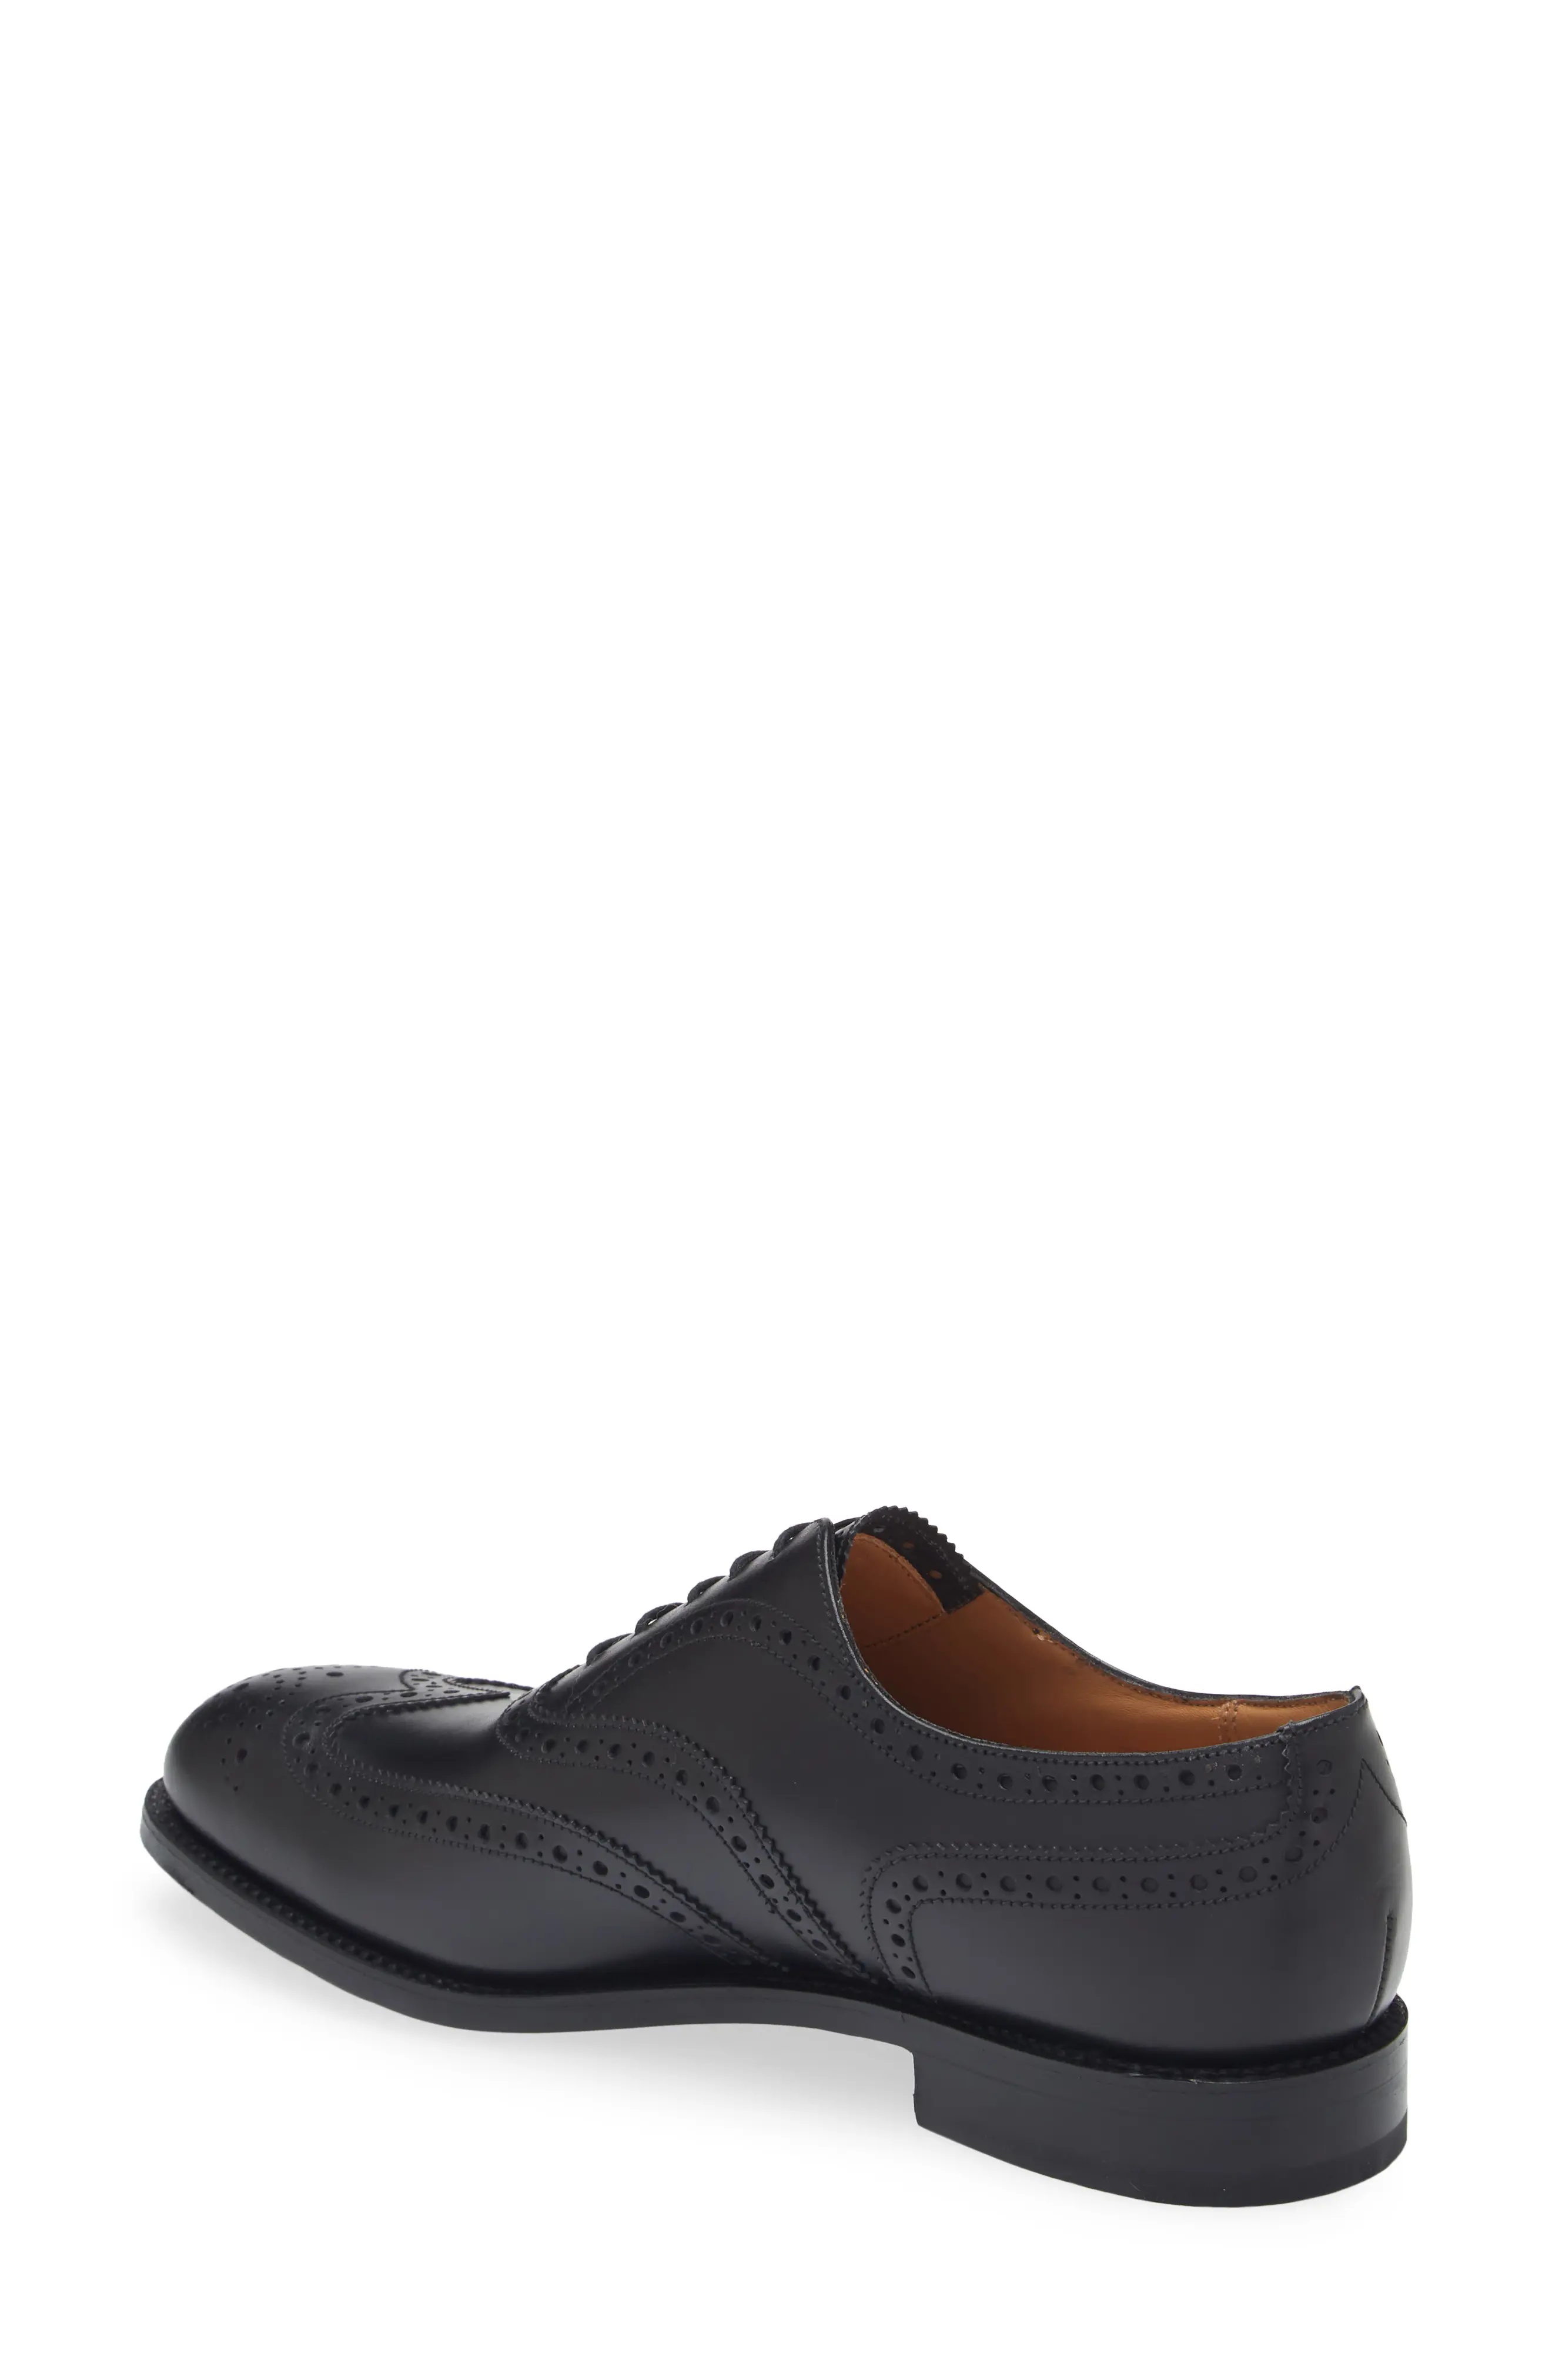 376 Reedition Archive Brogue Oxford - 2